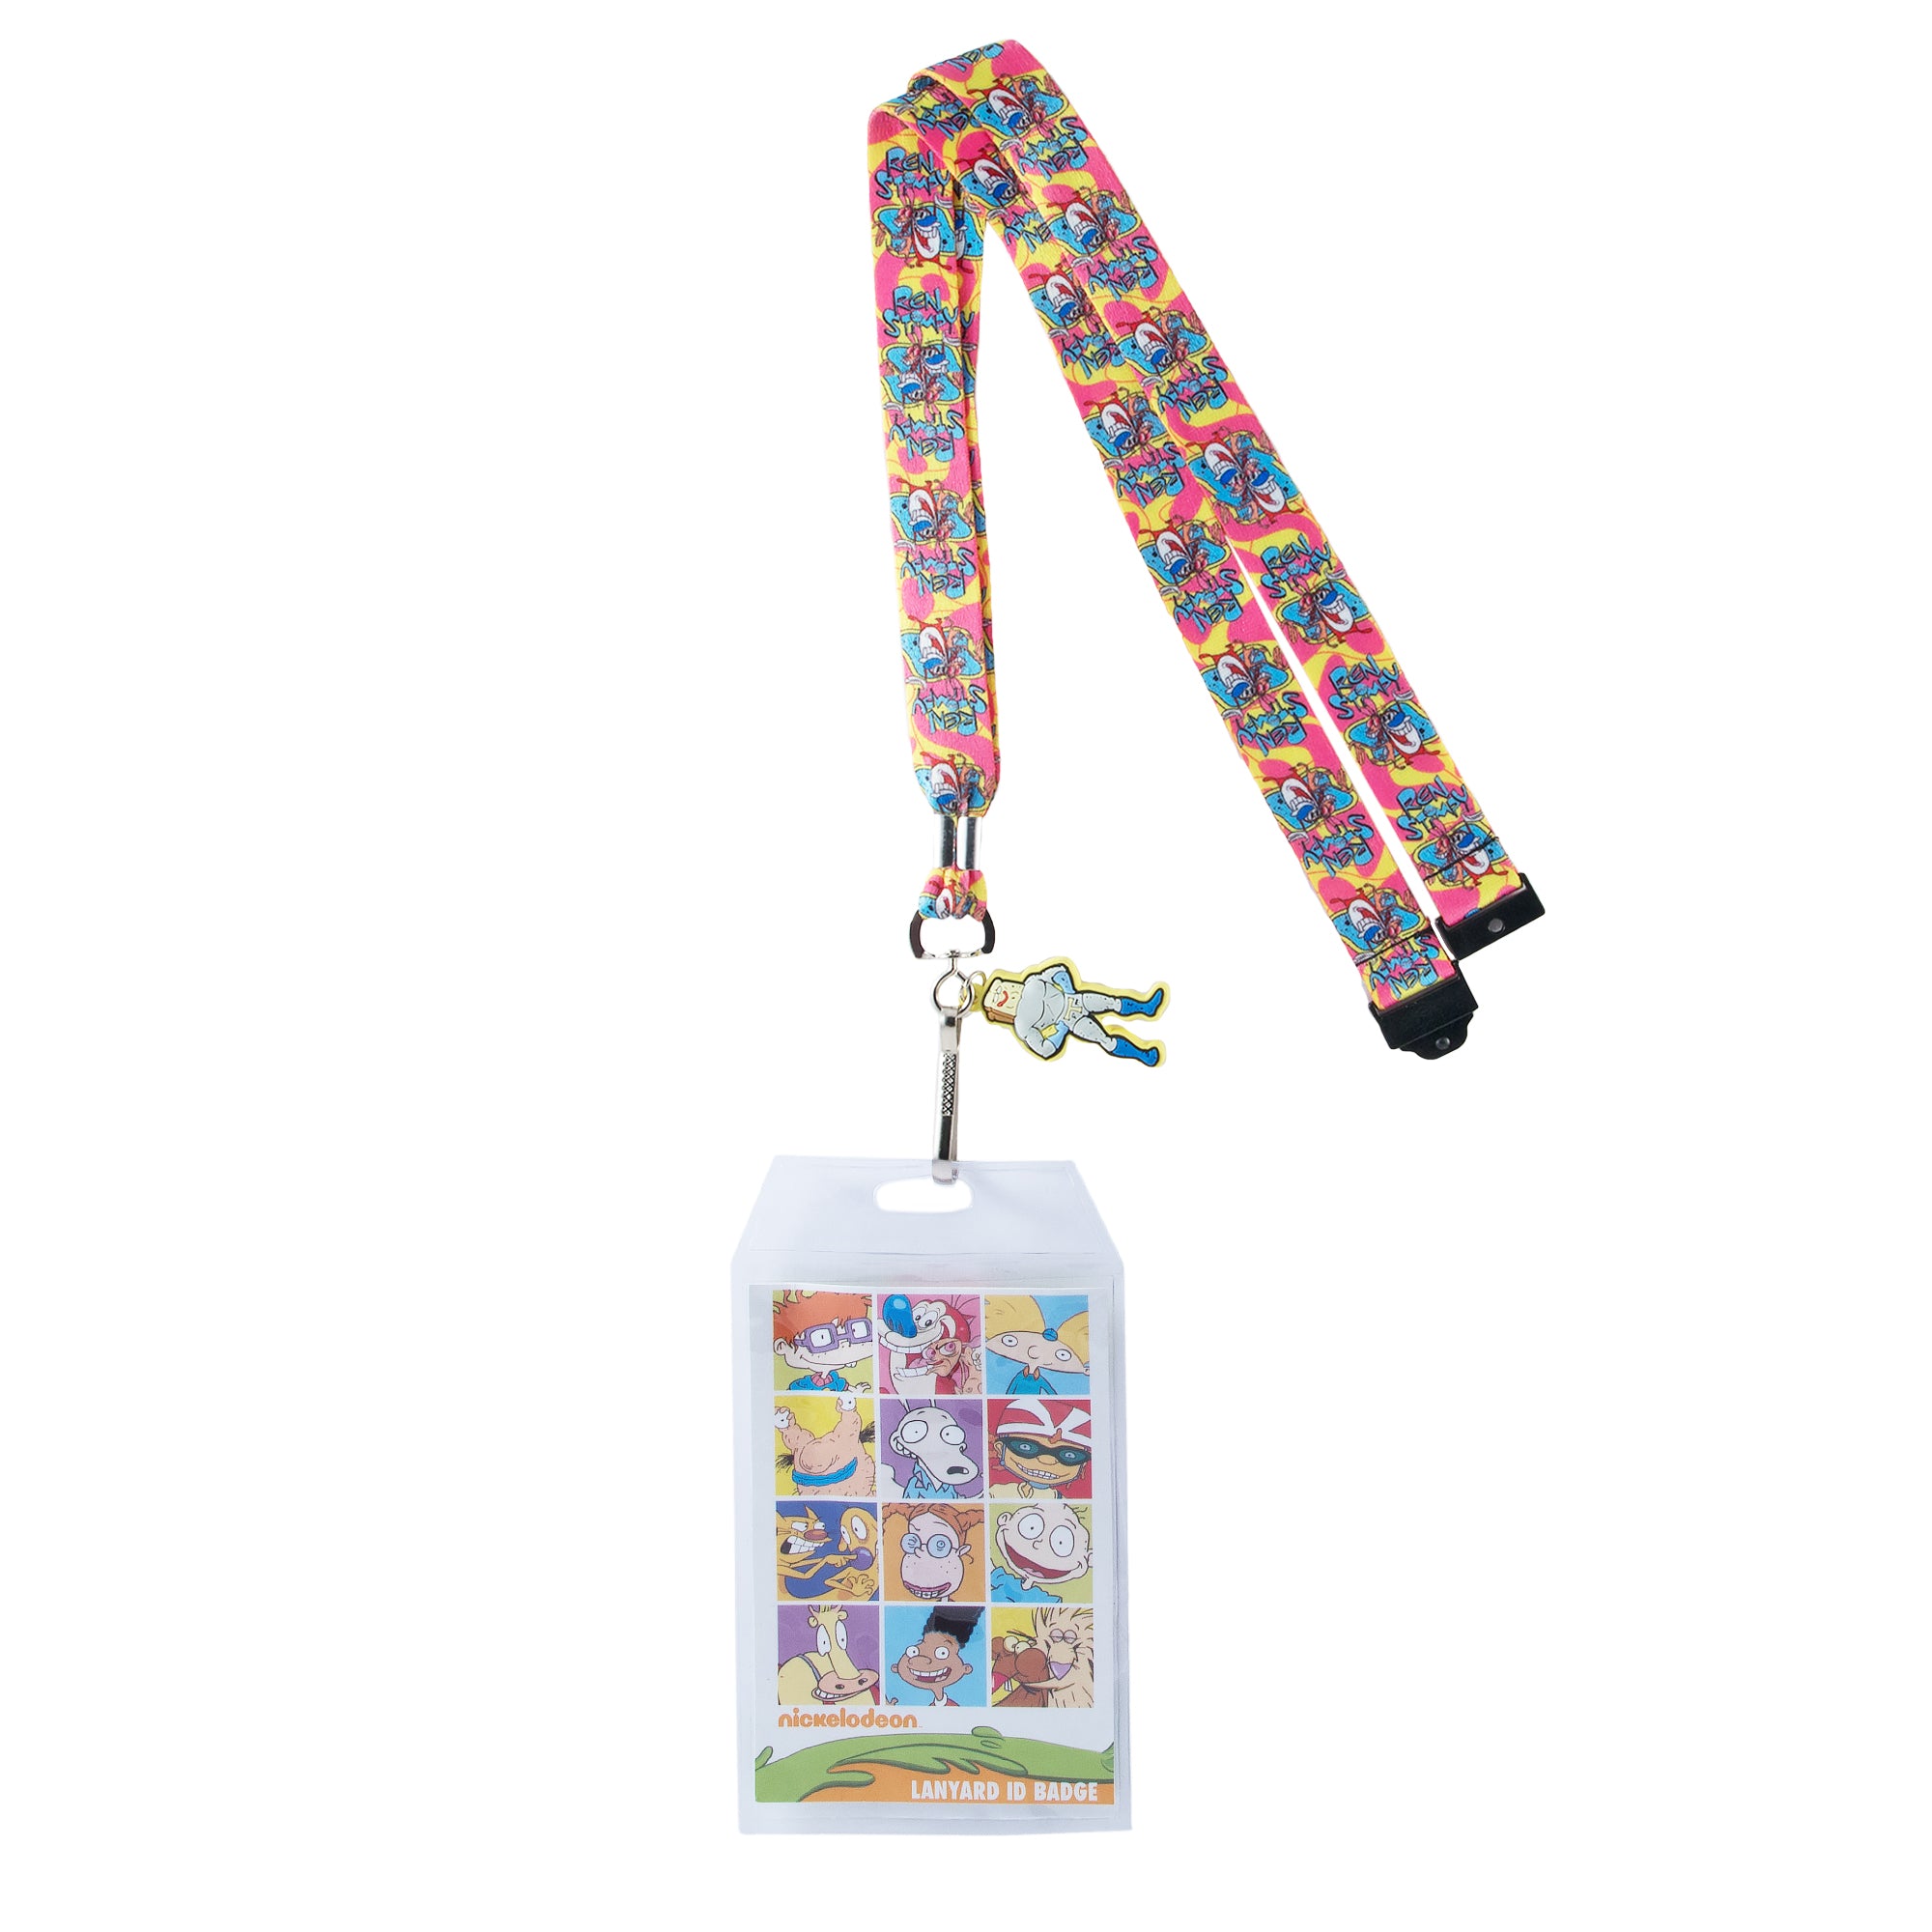 Ren & Stimpy Lanyard Badge Holder with Rubber Charm